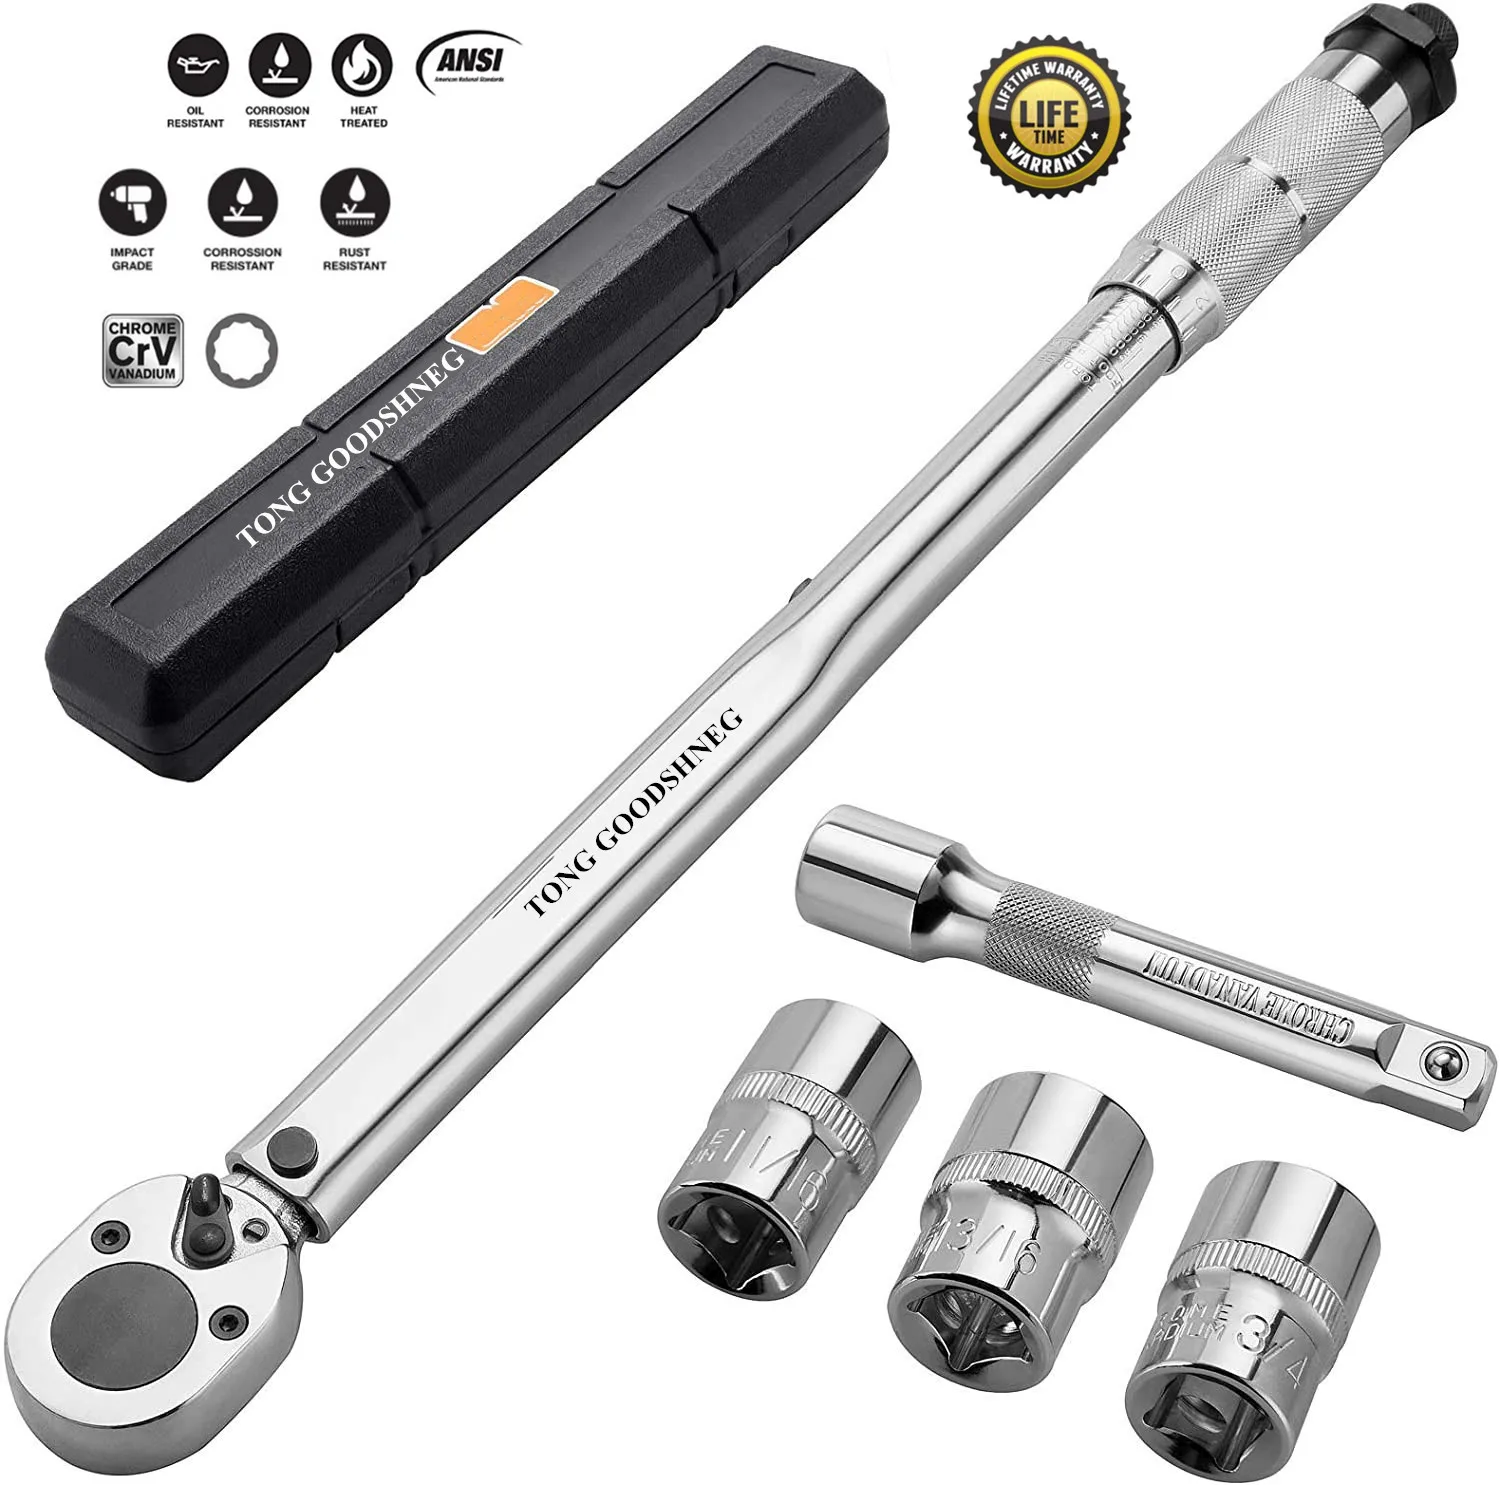 20-150 ft-lb Torque Wrench 1/2 Drive Click with Sockets and Extension I Reversible 1/2